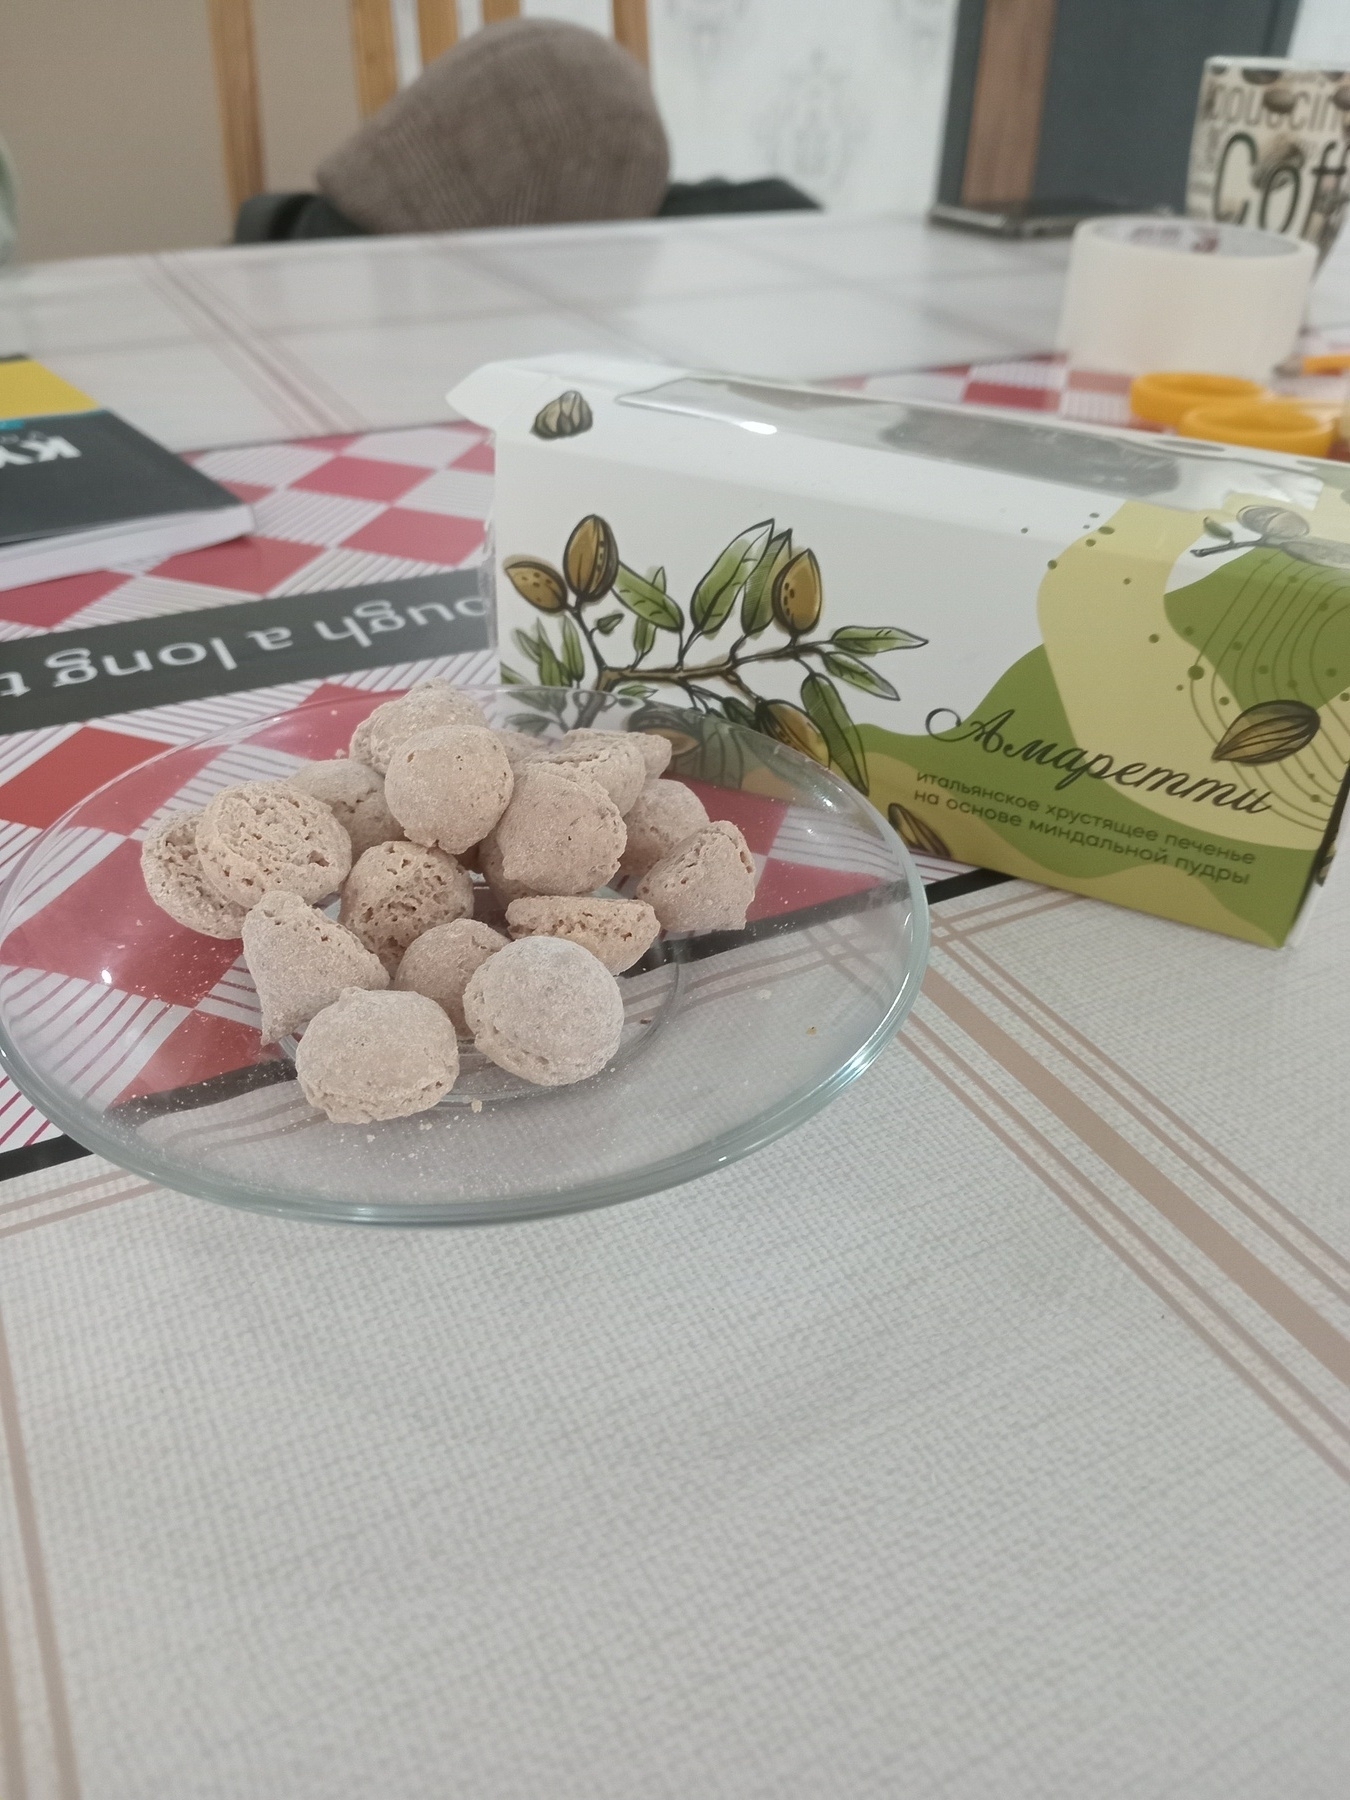 small light brown desserts in the shape of Hershey's kisses on a plate next to the box they were packaged in